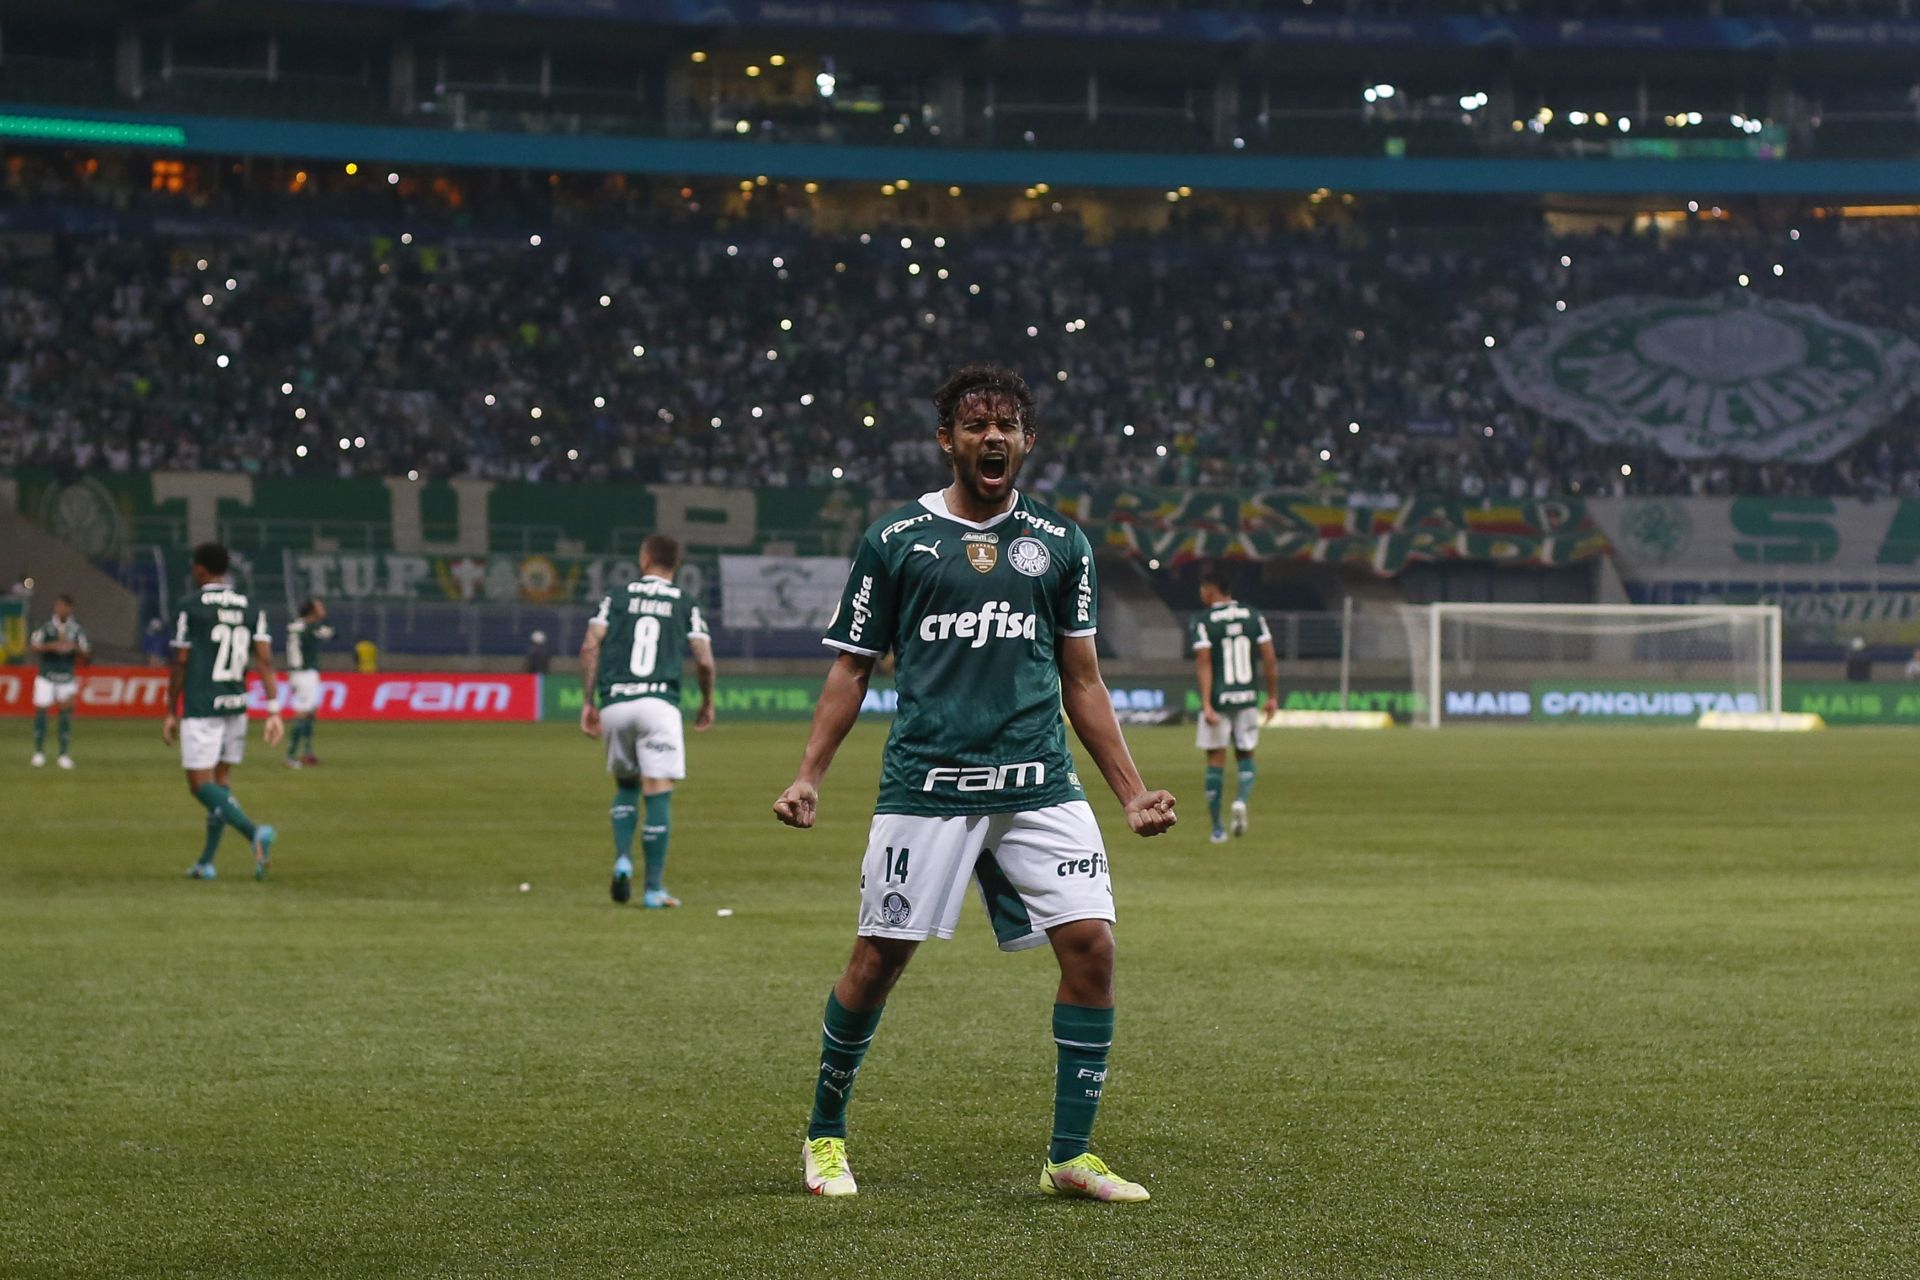 Palmeiras will look to make it five wins in a row in the Brazilian Serie A.